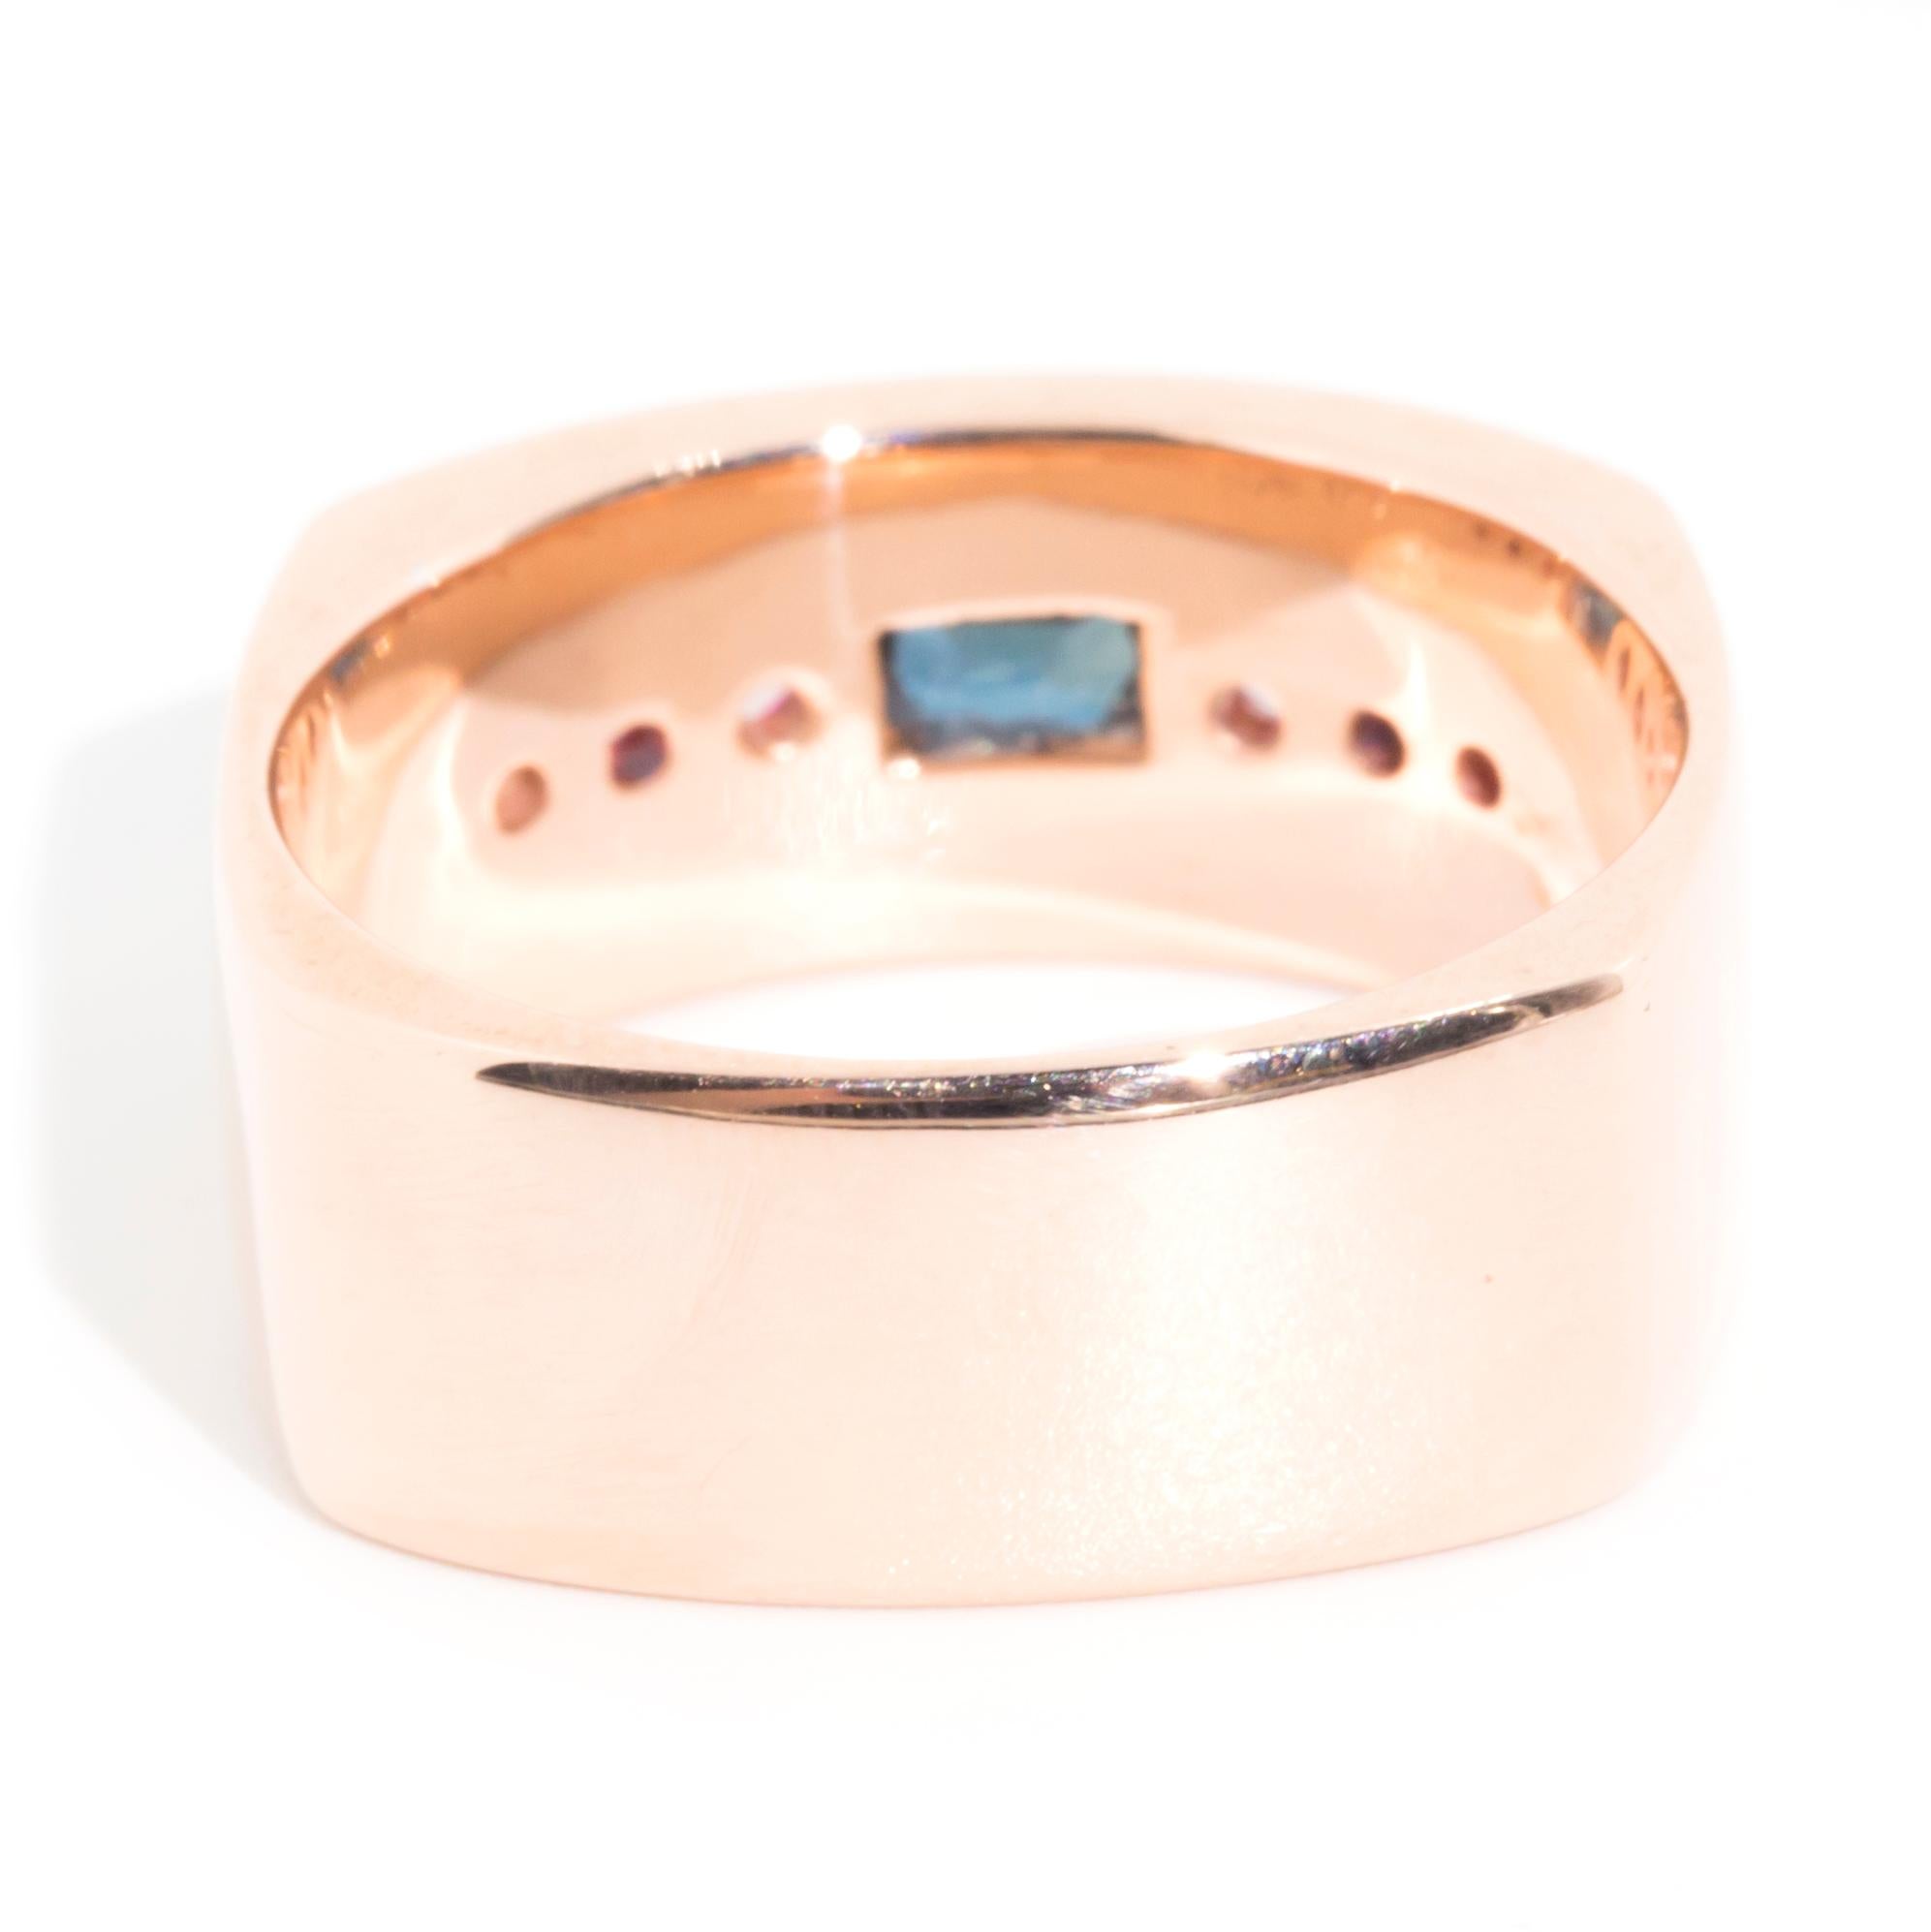 Round Diamond and Deep Blue Sapphire Men's Vintage Ring in 9 Carat Rose Gold 2